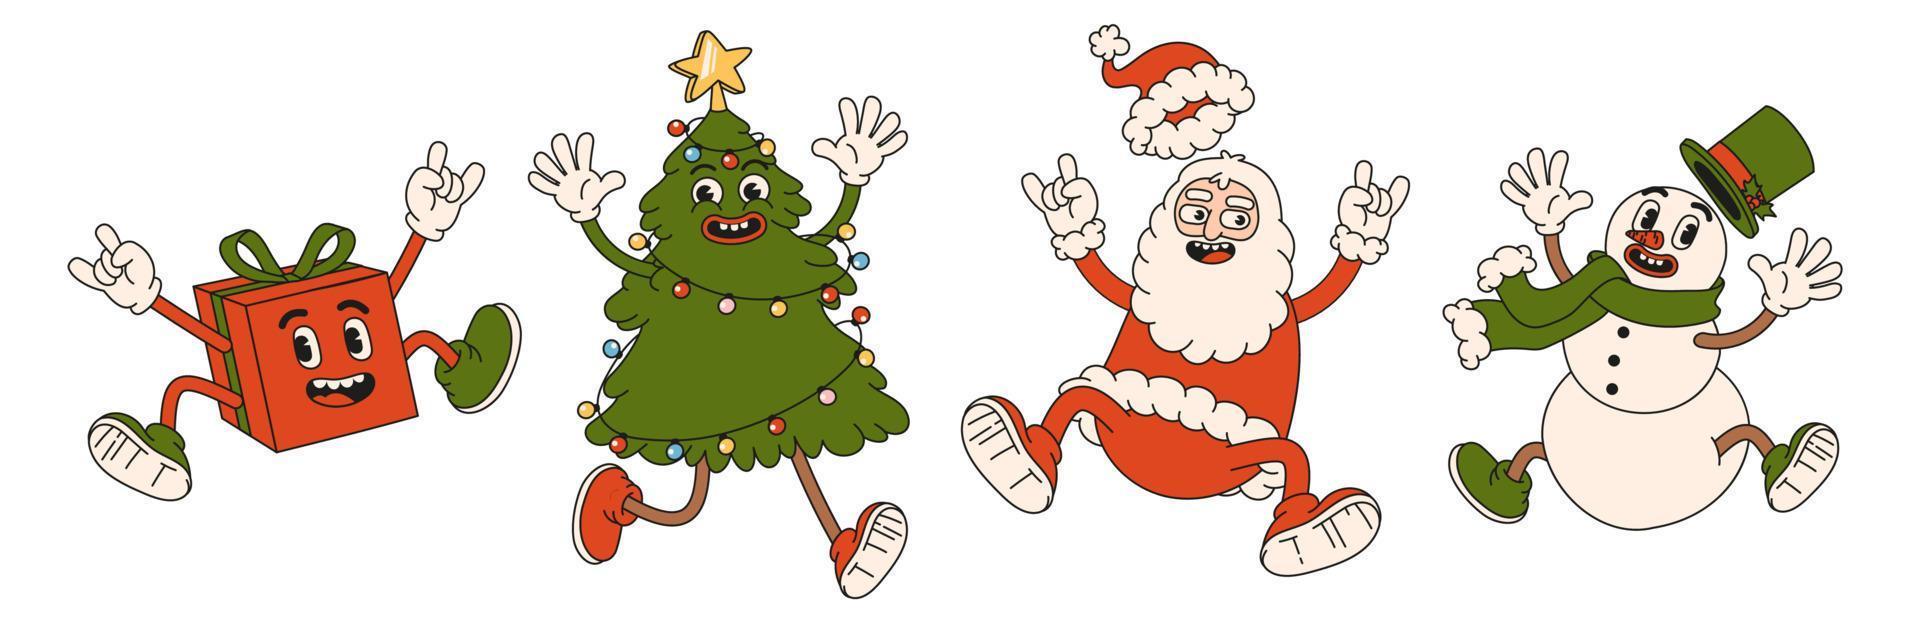 Merry Christmas and Happy New year. Santa Claus, Christmas tree, snowman, gift. vector